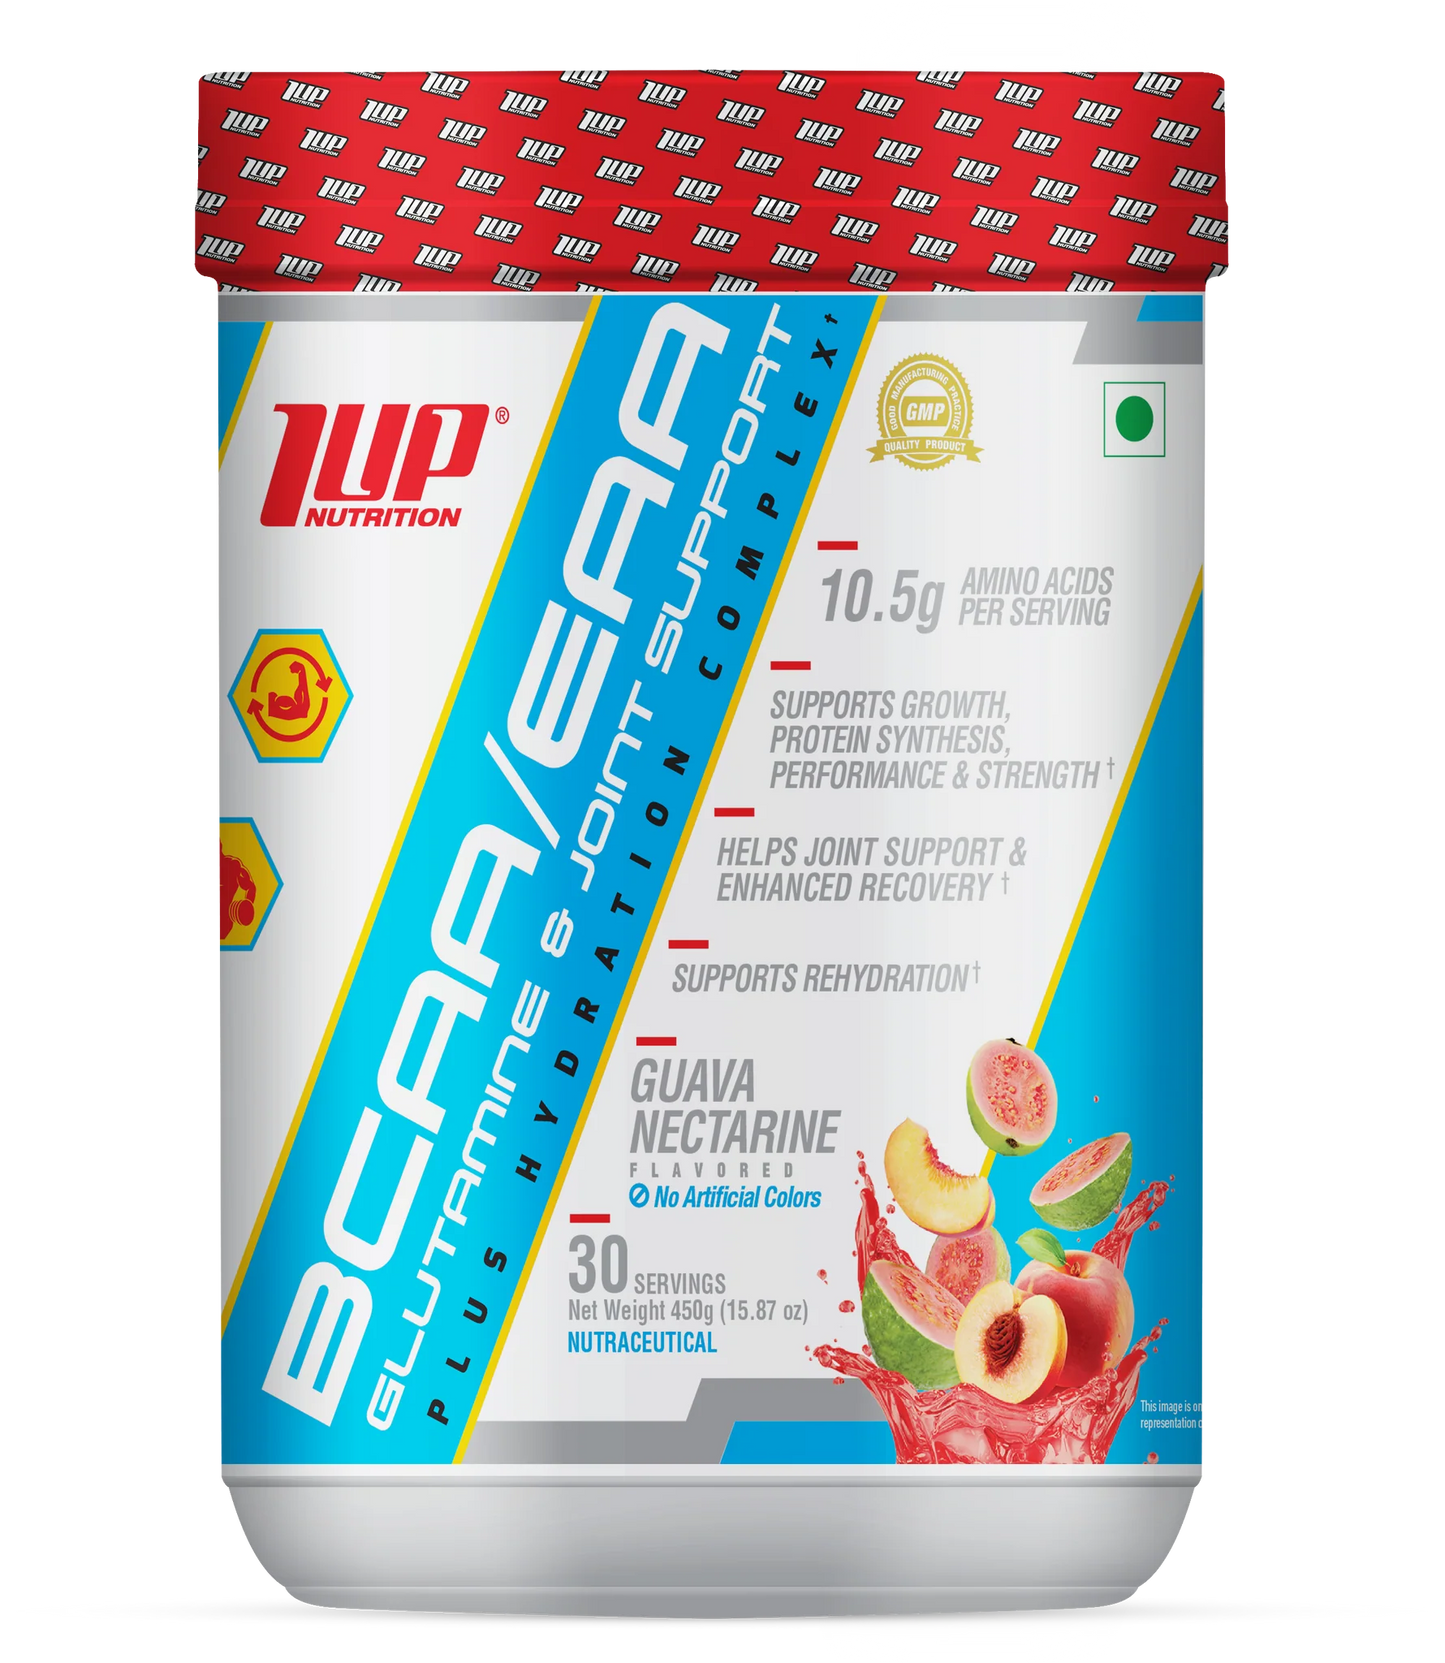 BCAA/EAA Glutamina y Joint Support 1UP Nutrition